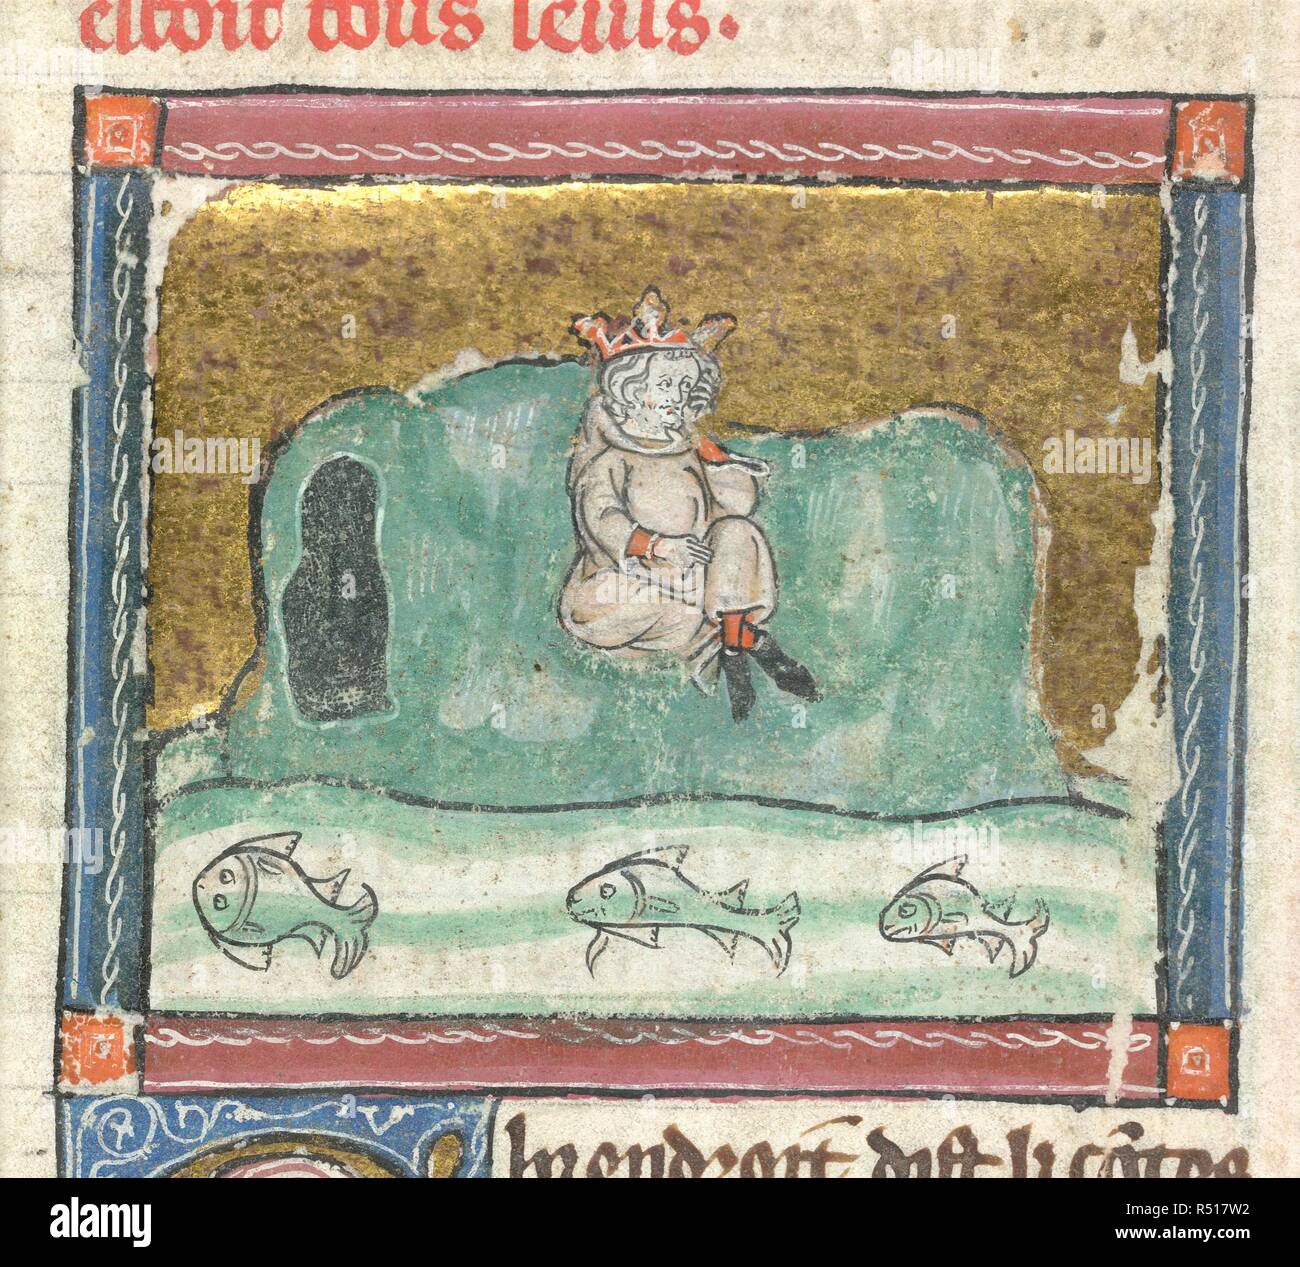 A king sits by a river. L'Estoire del Saint Graal. Beginning of the xivth century. Image taken from L'Estoire del Saint Graal. Source: Add. 10292, f.22v. Language: French. Stock Photo